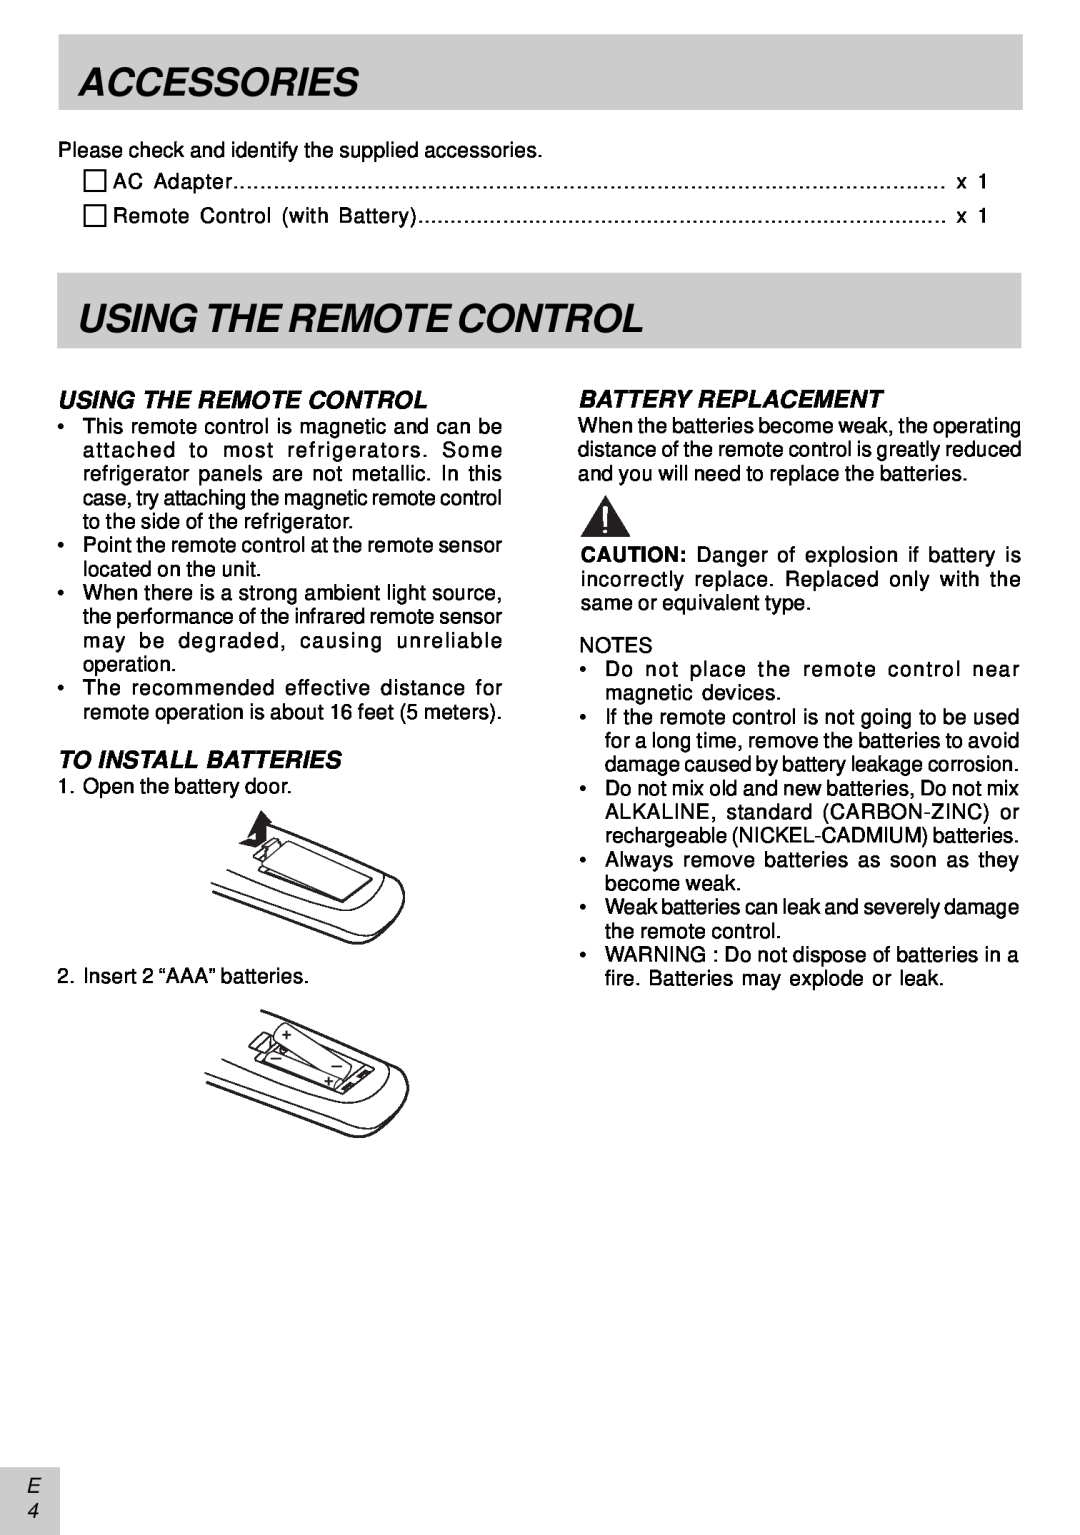 Audiovox PLV16081 instruction manual Accessories, Using The Remote Control 